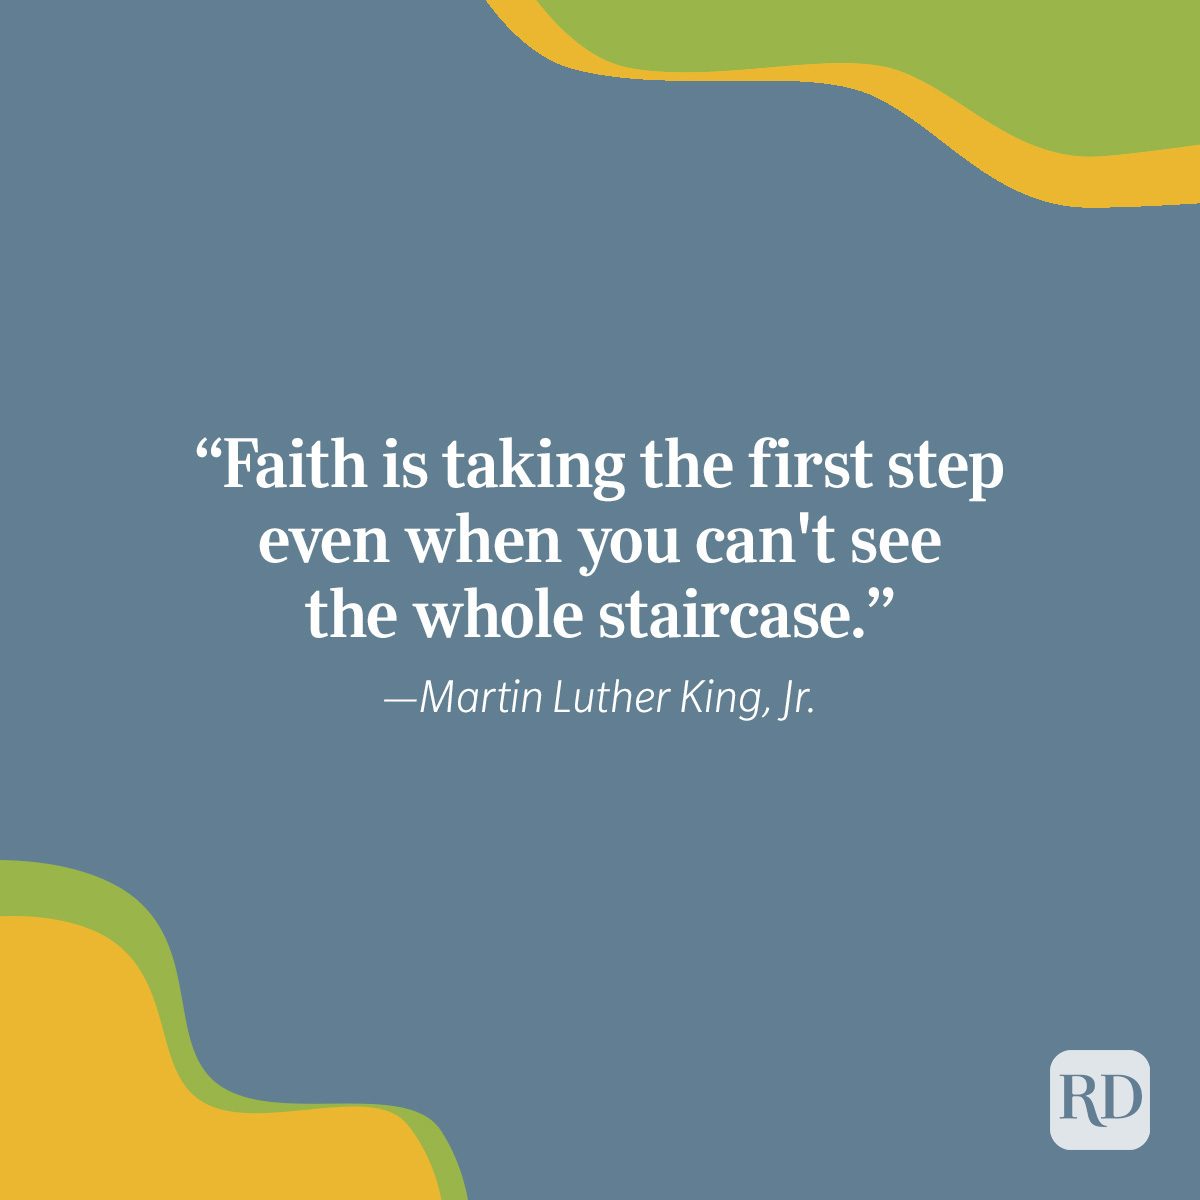 Martin Luther King, Jr. Quotes II